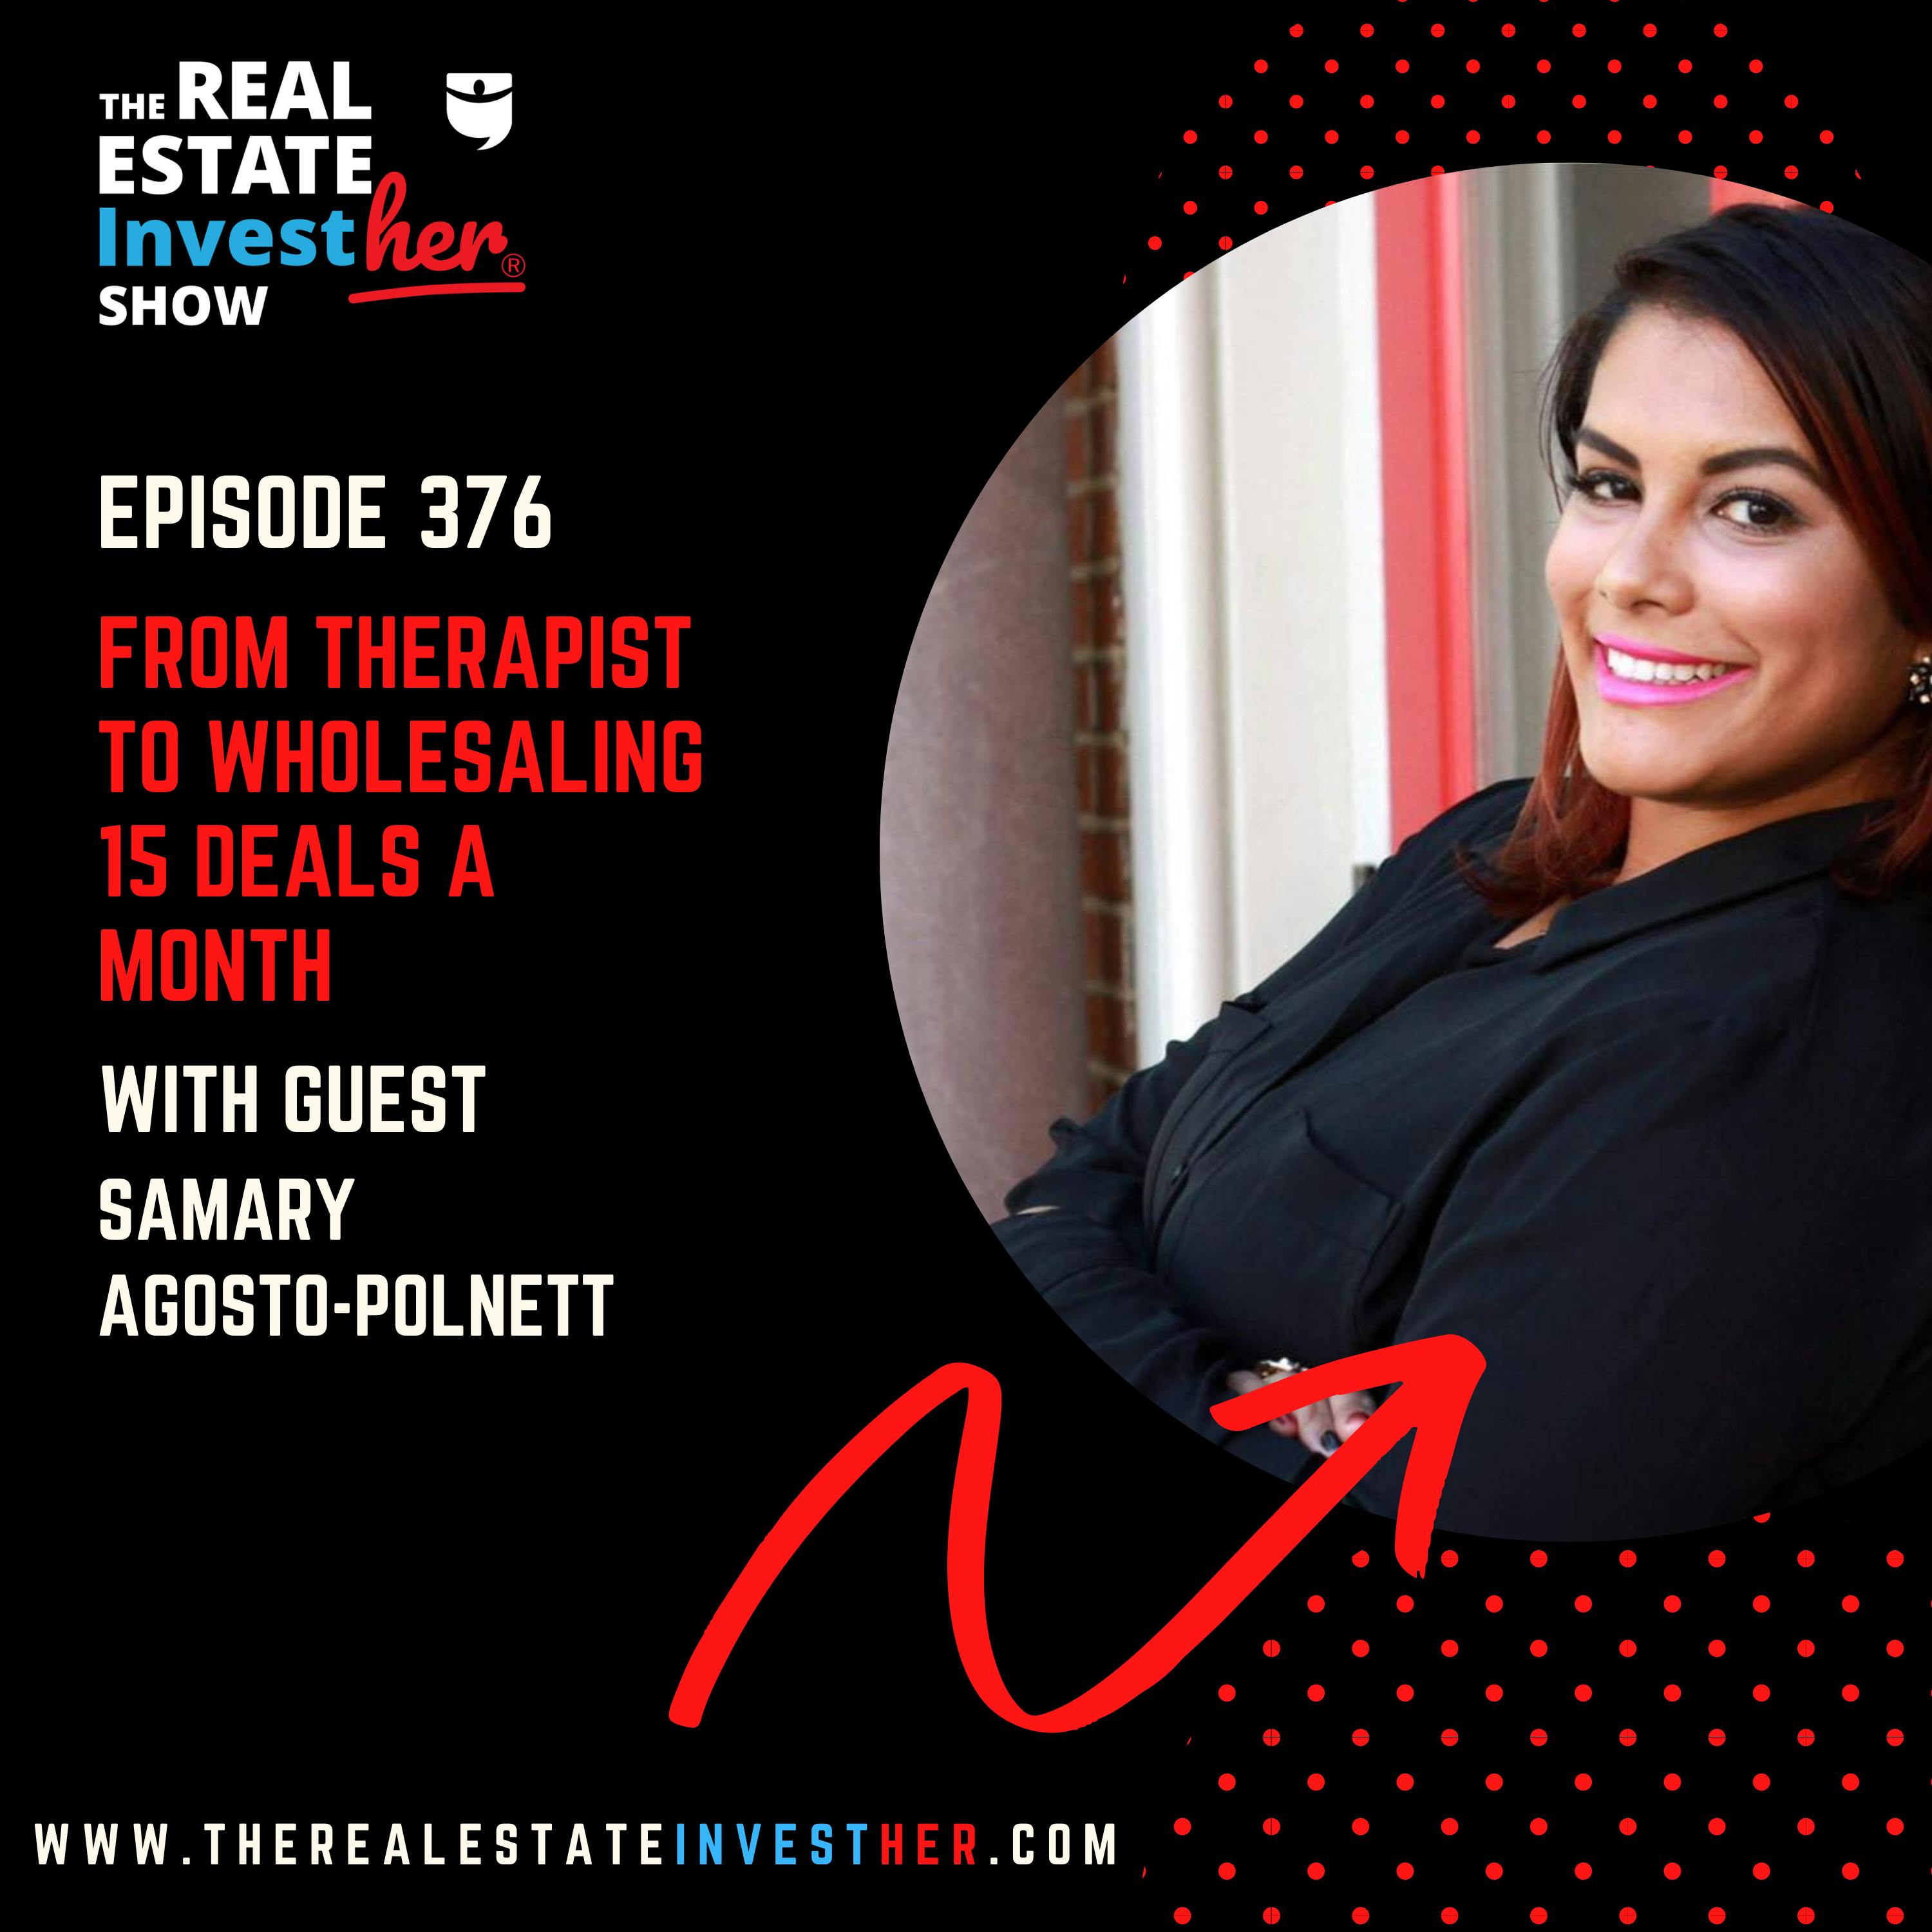 From Therapist to Wholesaling 15 Deals a Month